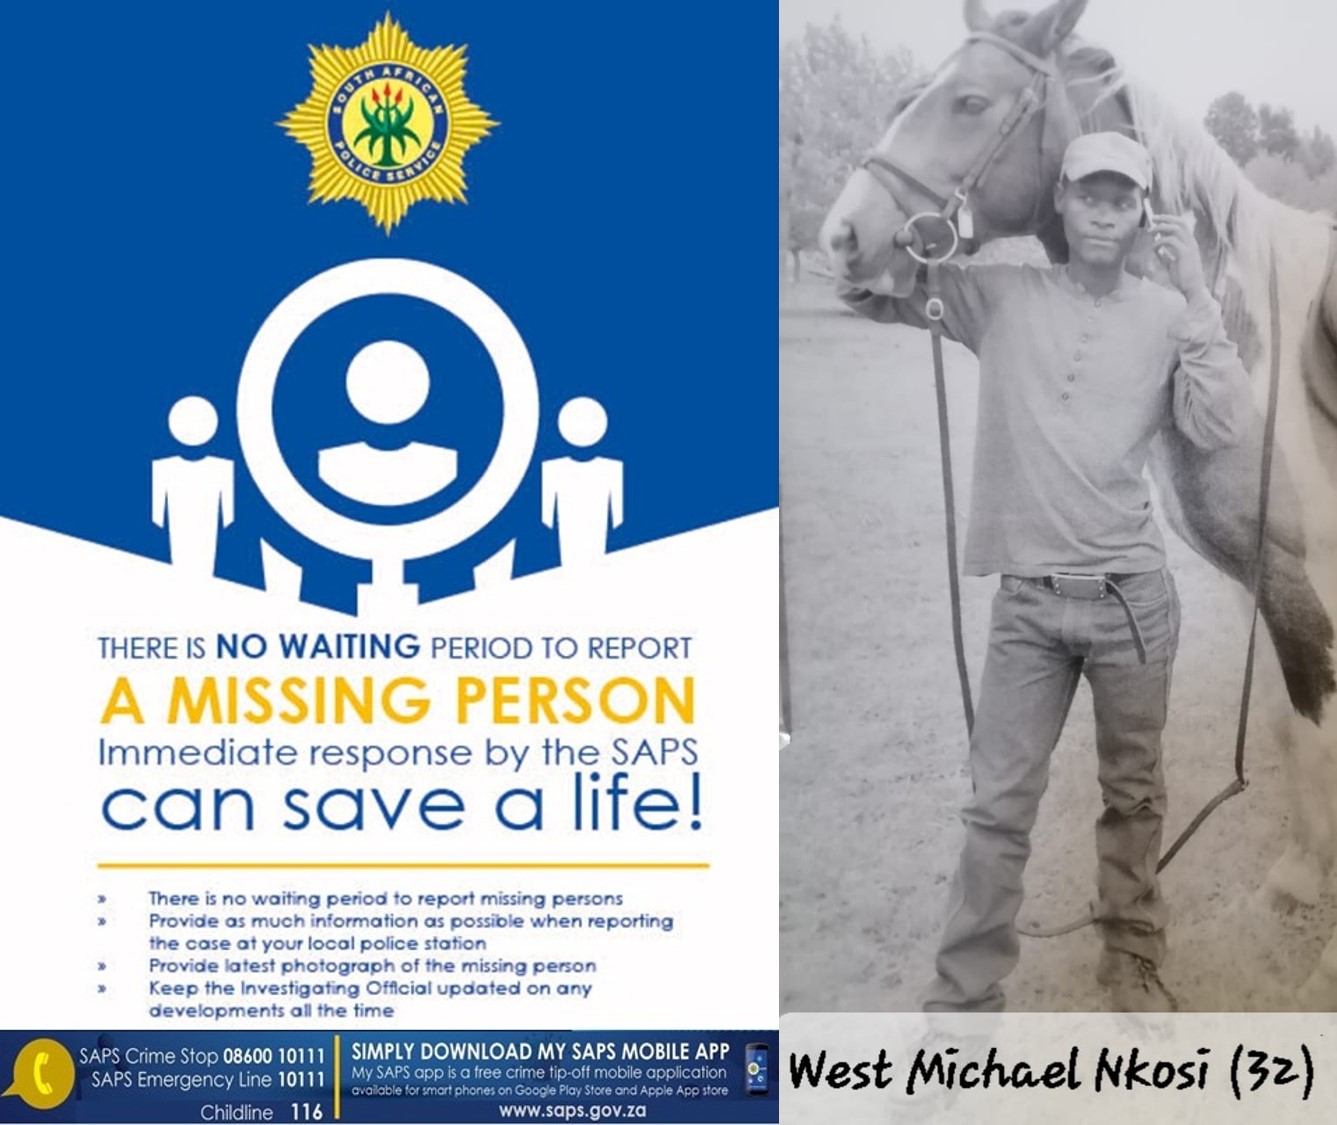 Police in Waterval Boven are requesting the public to help them reunite a missing man with his family in Hlalakahle